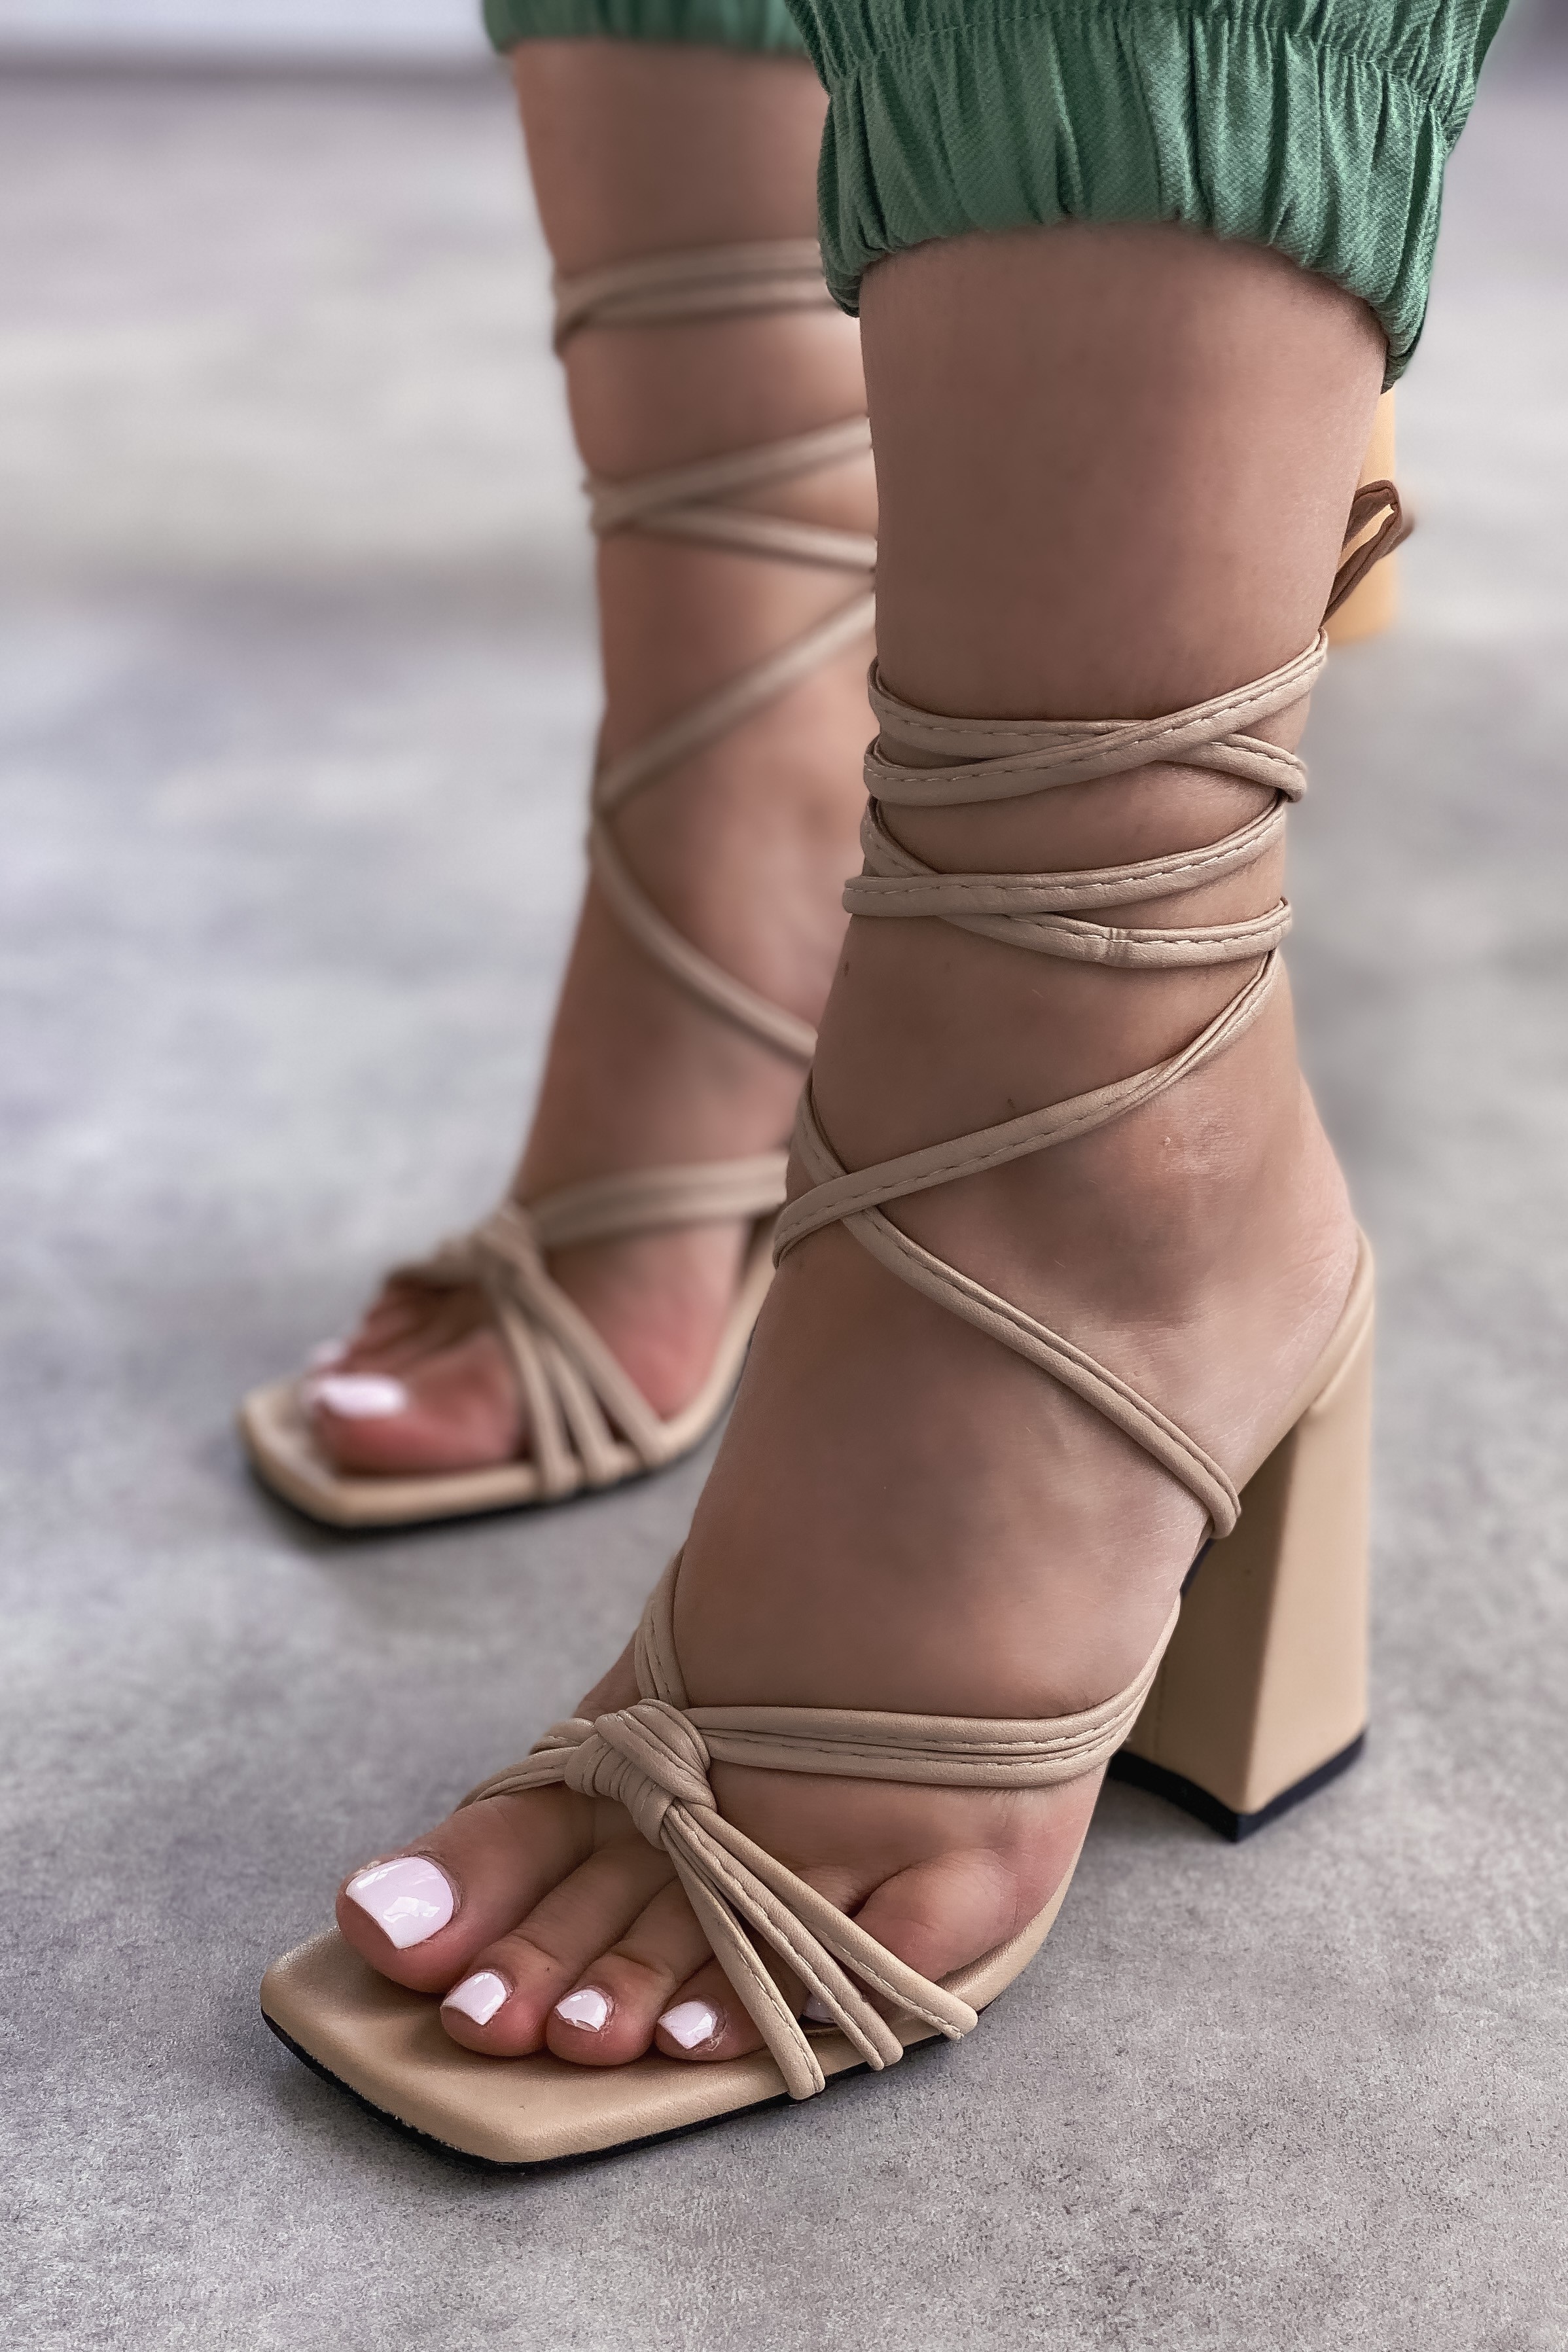 Rondepa matte leather high heels shoes nude